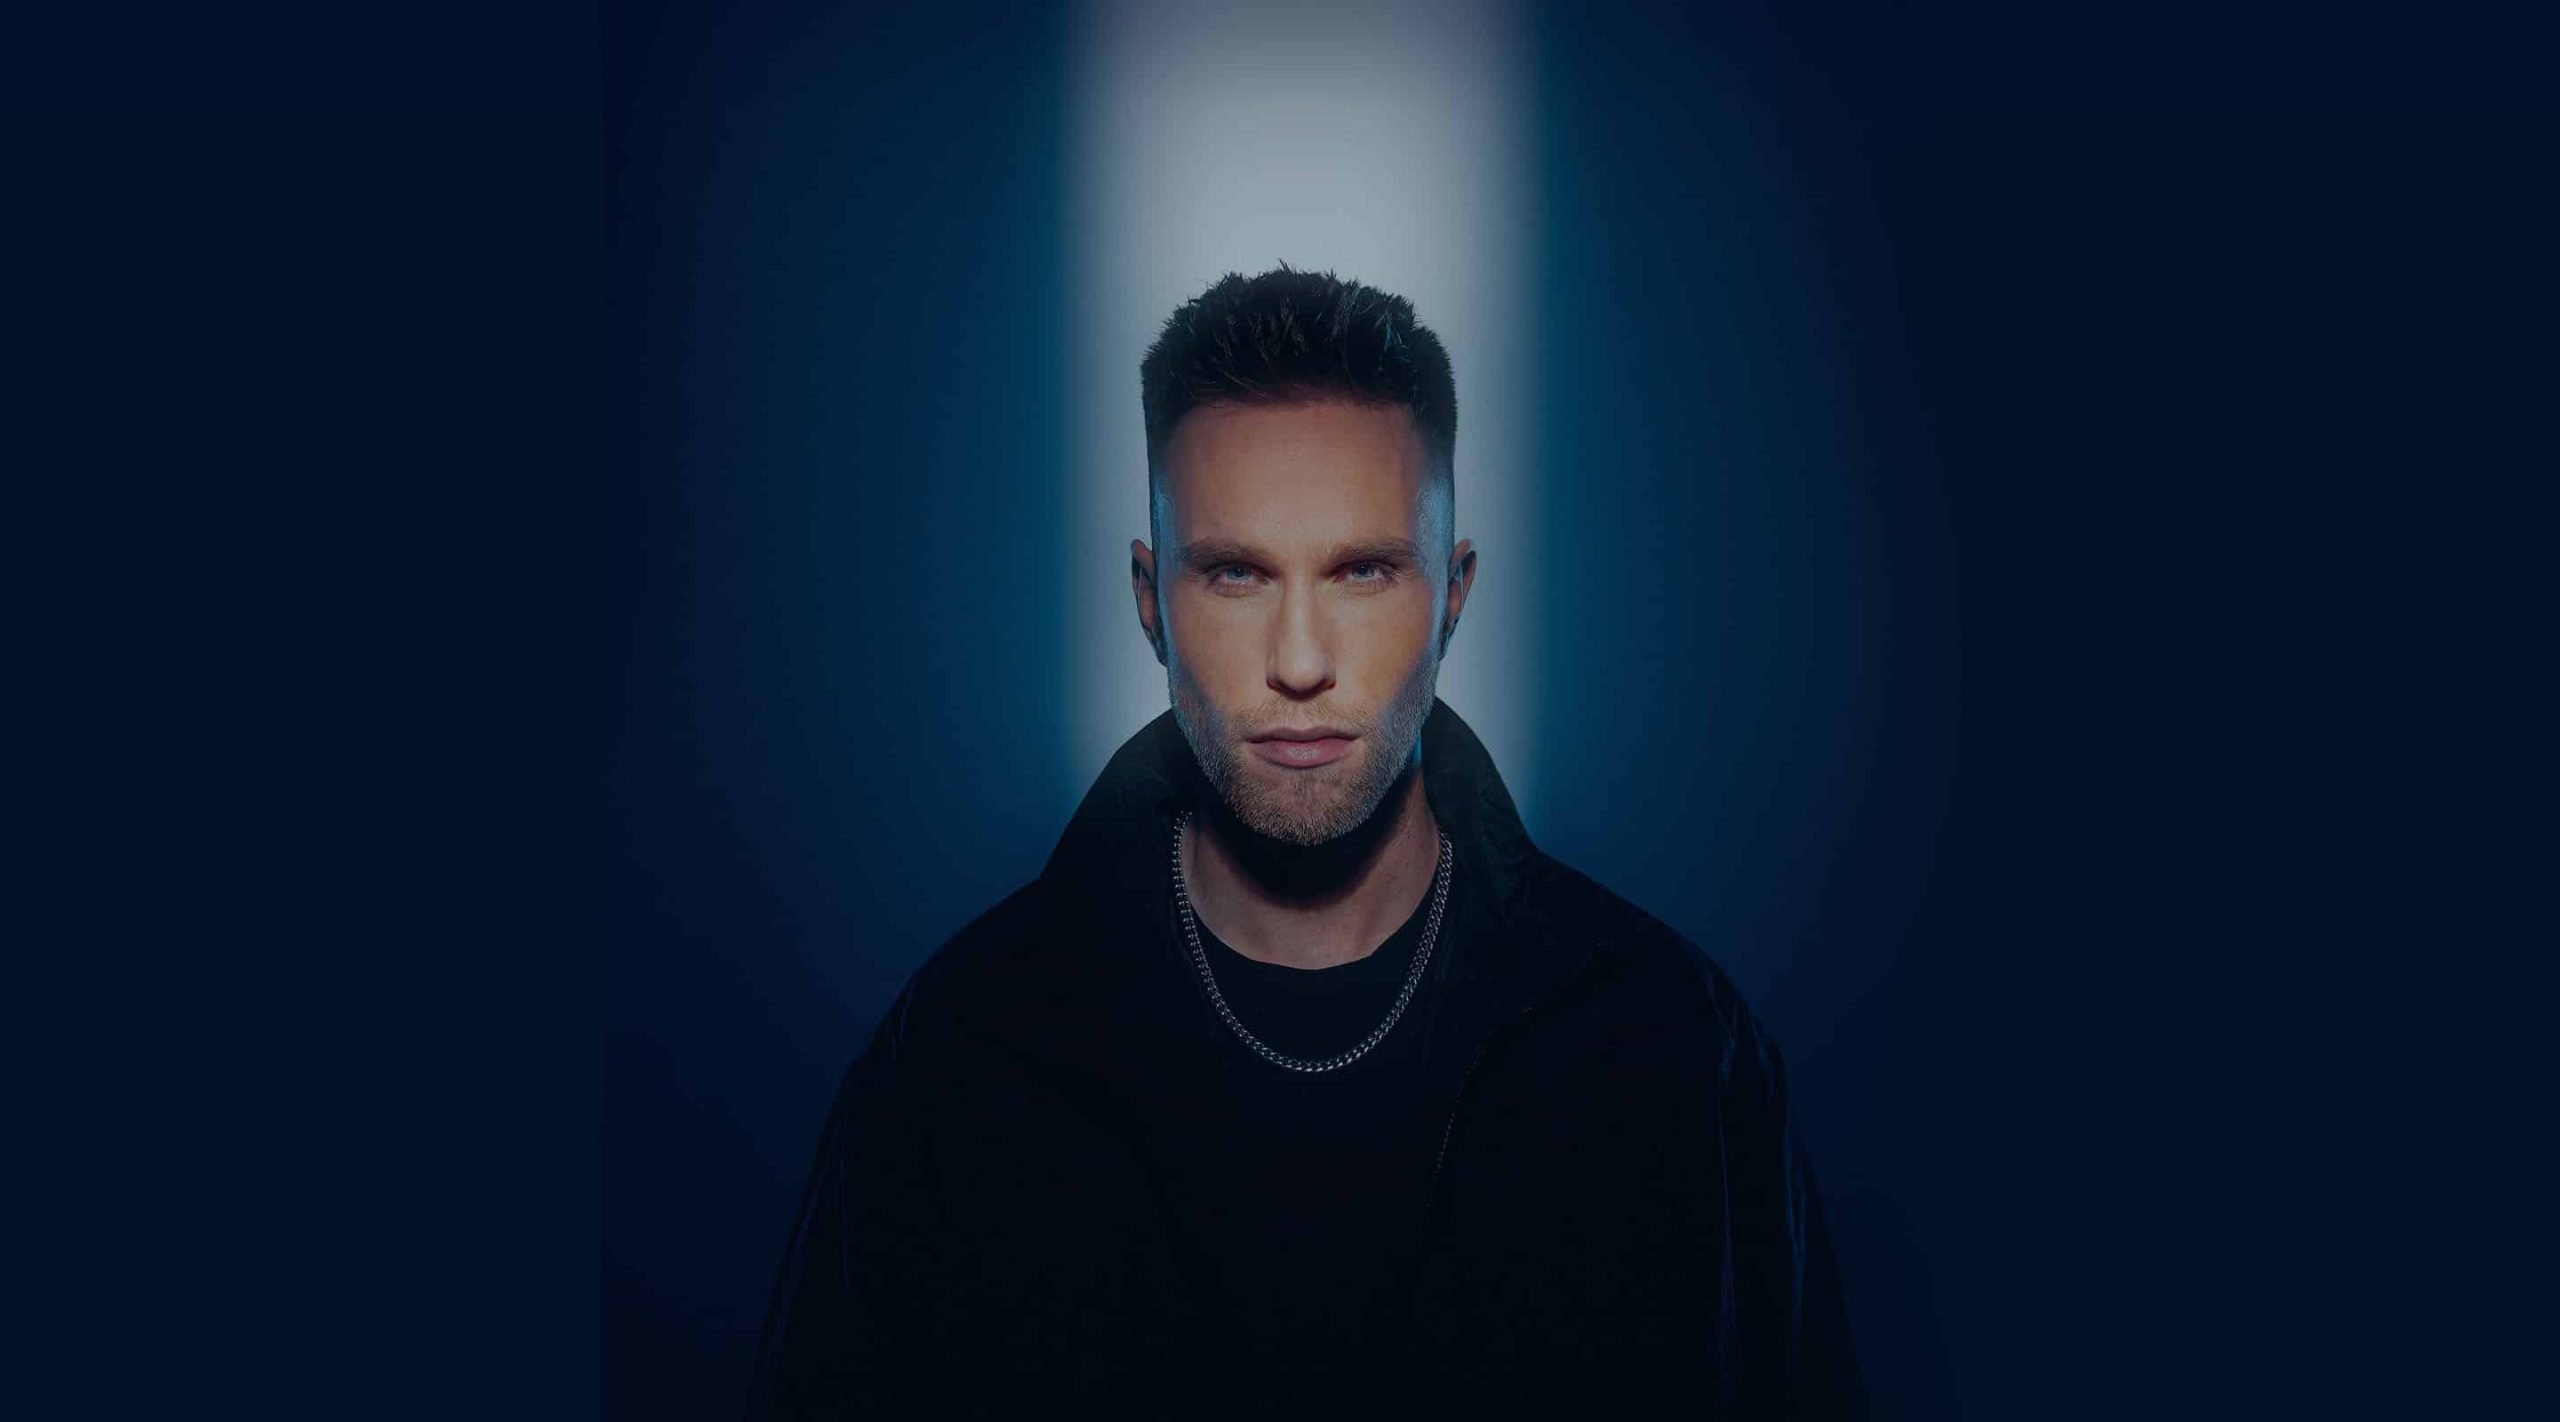 Nicky Romero releases uplifting new track ‘Forever’ with Nico & Vinz: Listen